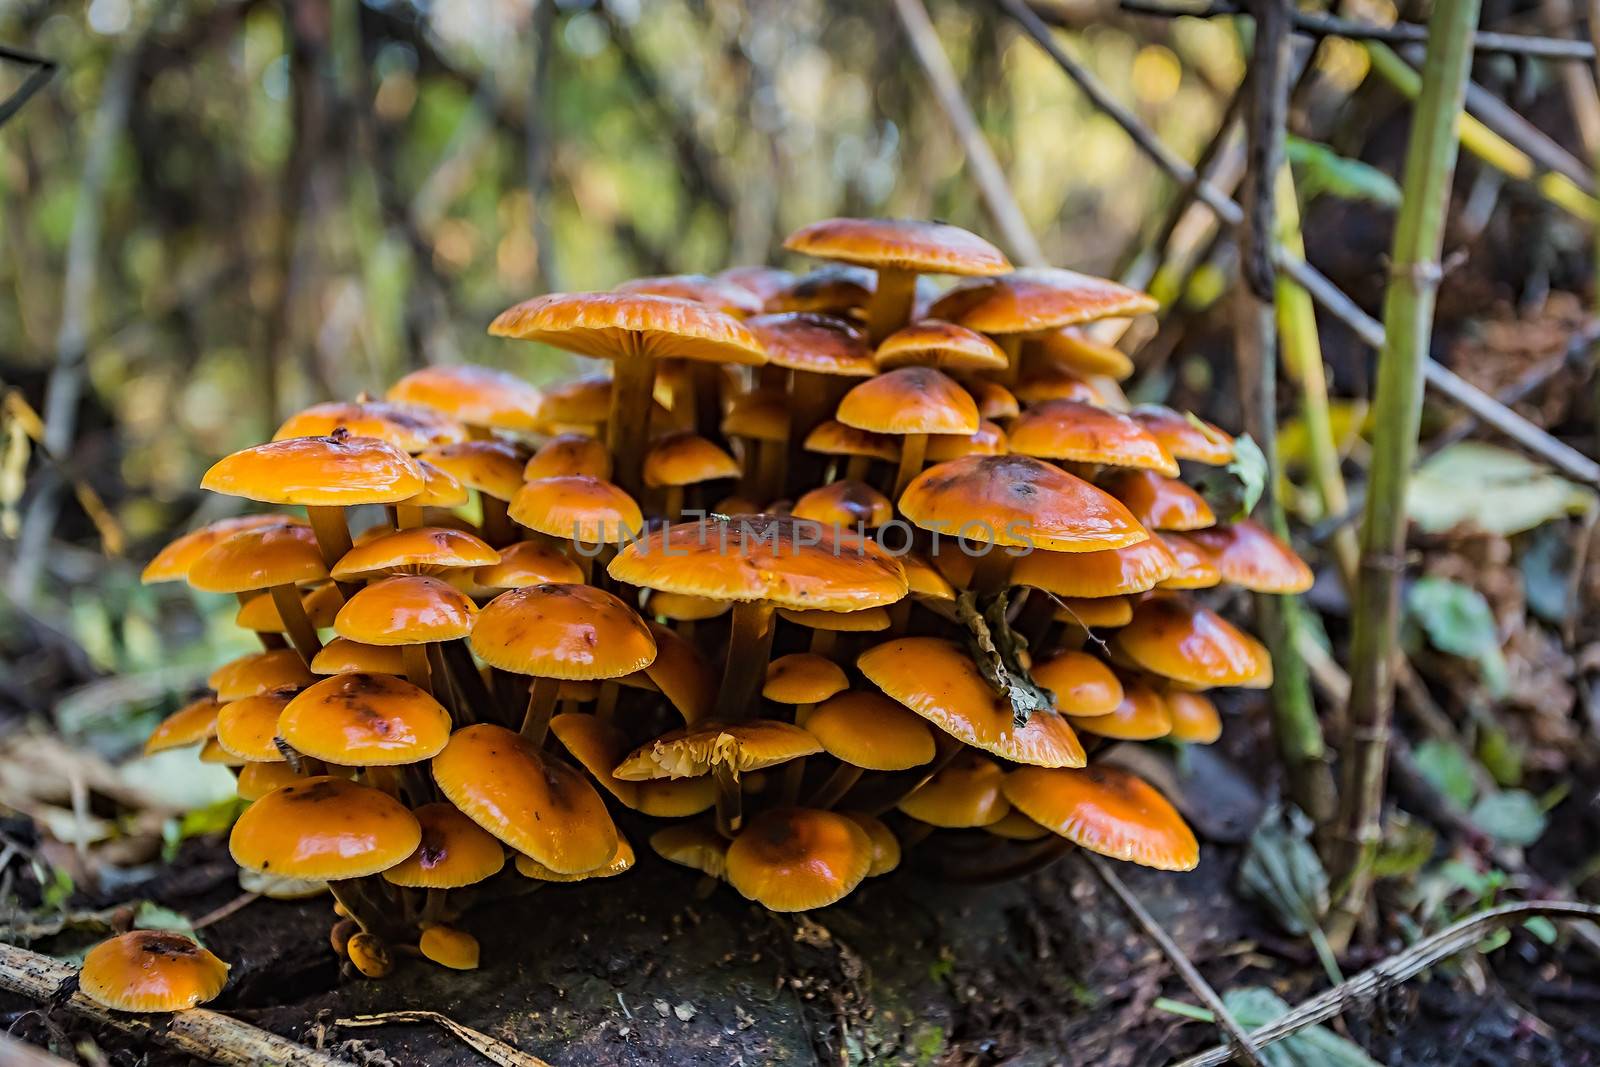 Group of mushrooms in the forest glade